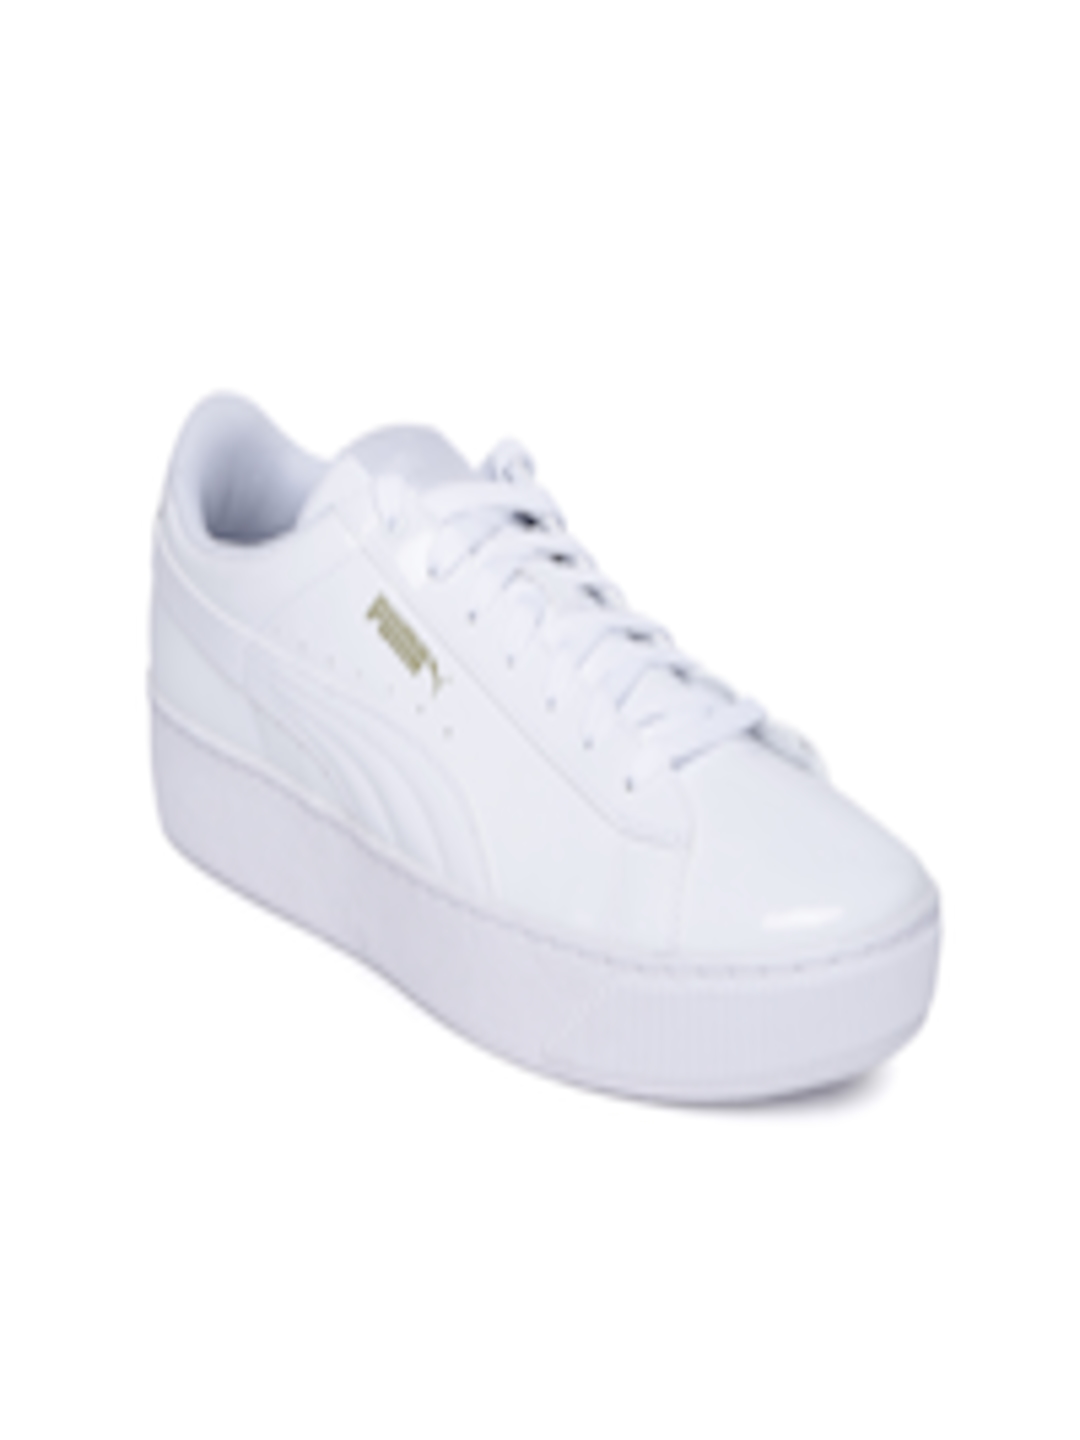 Buy Puma Women White Vikky Patent Platform Sneakers - Casual Shoes for ...